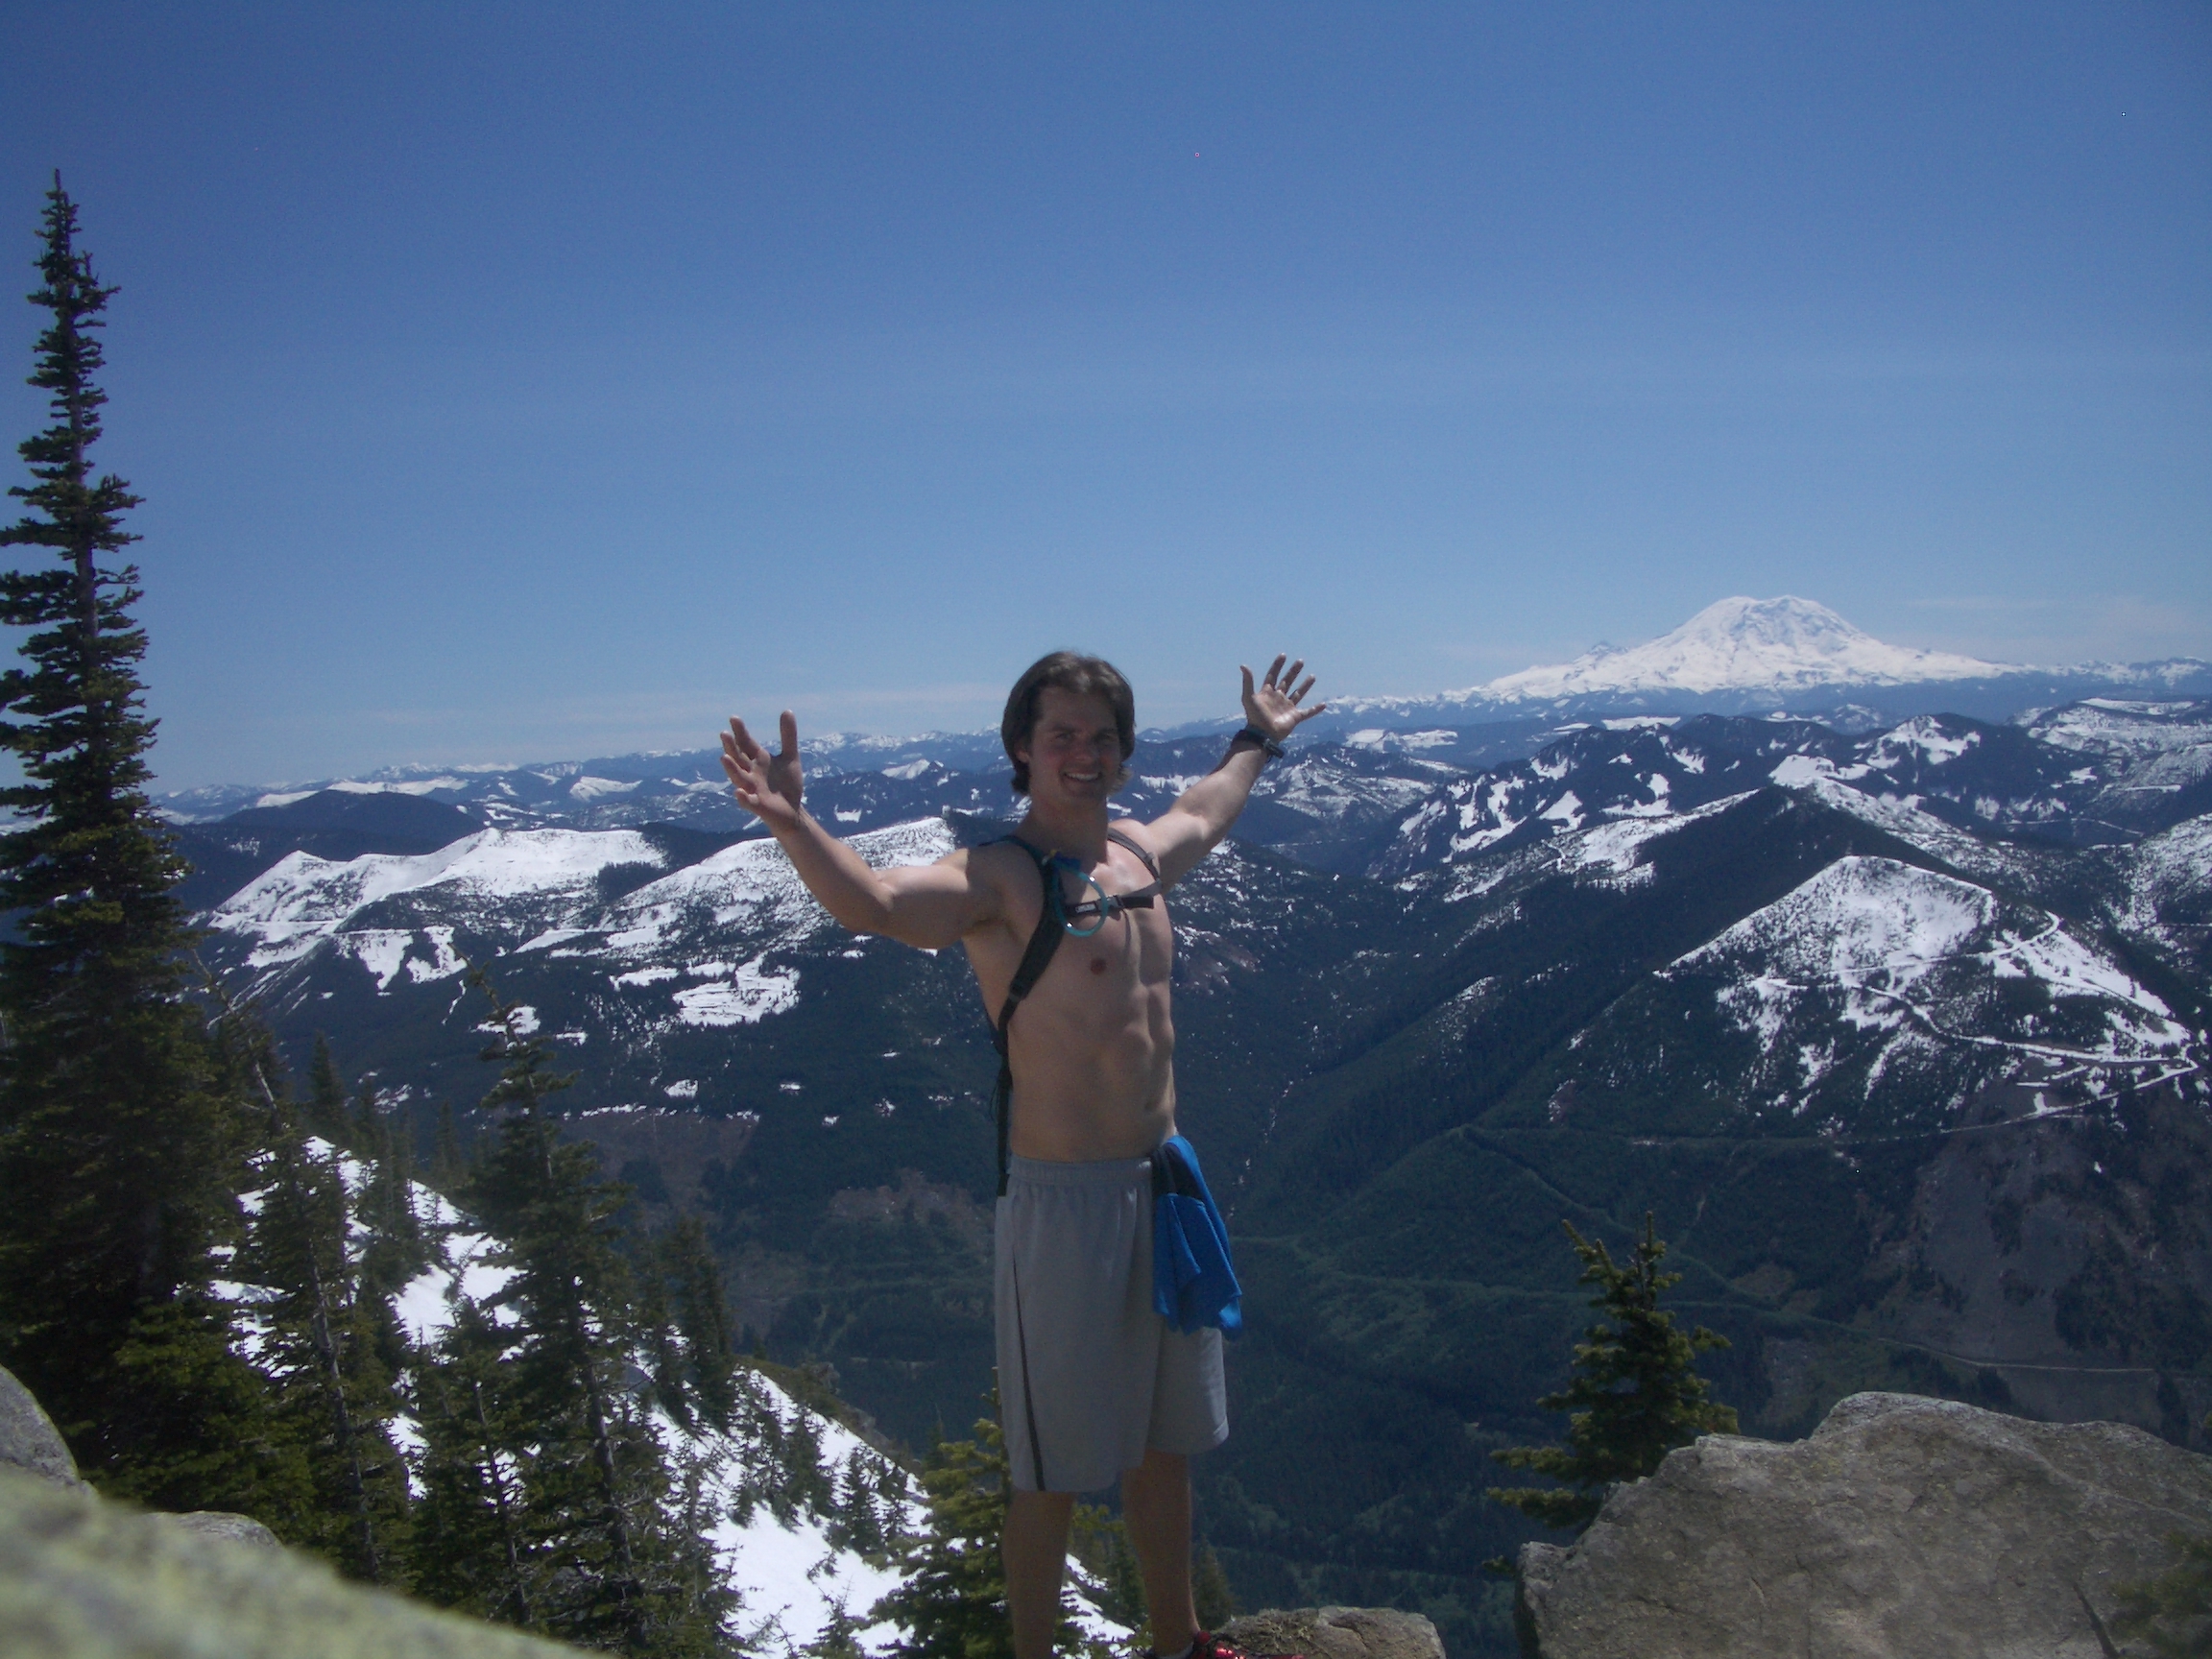 Joe hiking mount defiance in Washington at the top of the mountain